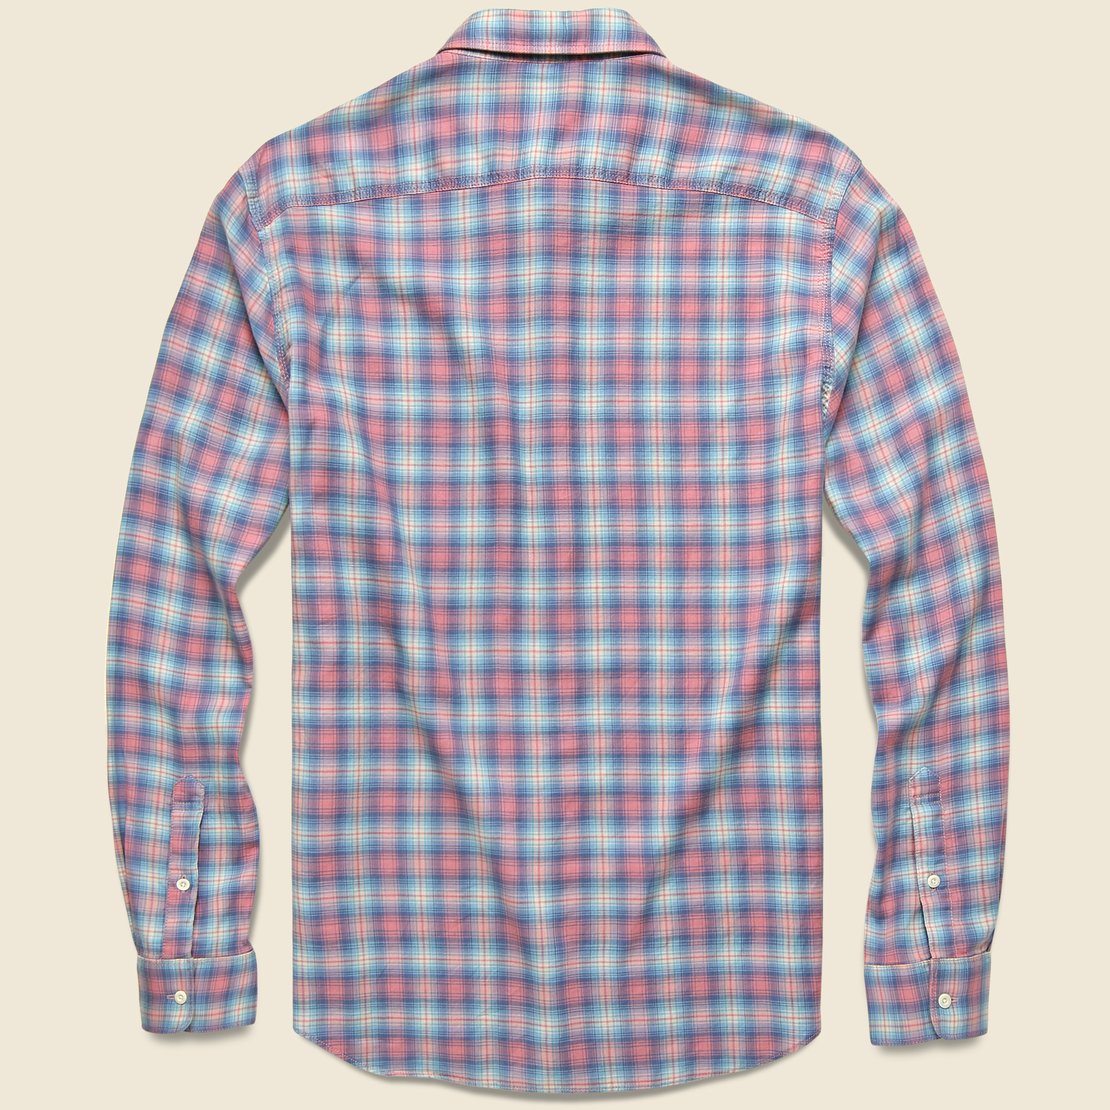 Everyday Shirt - Summerland Plaid - Faherty - STAG Provisions - Tops - L/S Woven - Plaid